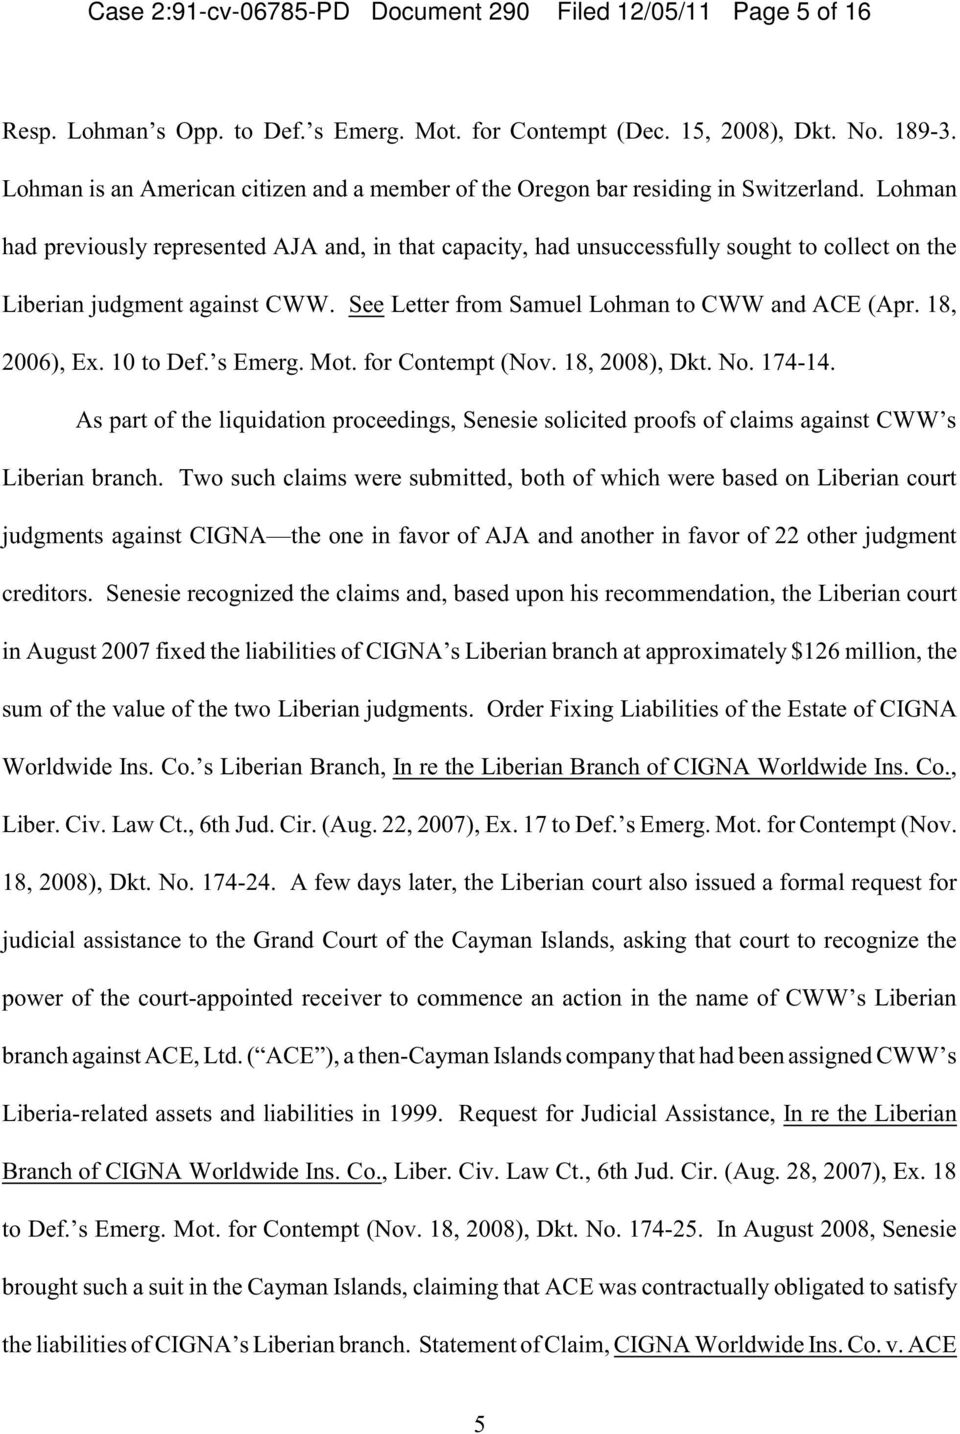 Lohman had previously represented AJA and, in that capacity, had unsuccessfully sought to collect on the Liberian judgment against CWW. See Letter from Samuel Lohman to CWW and ACE (Apr.